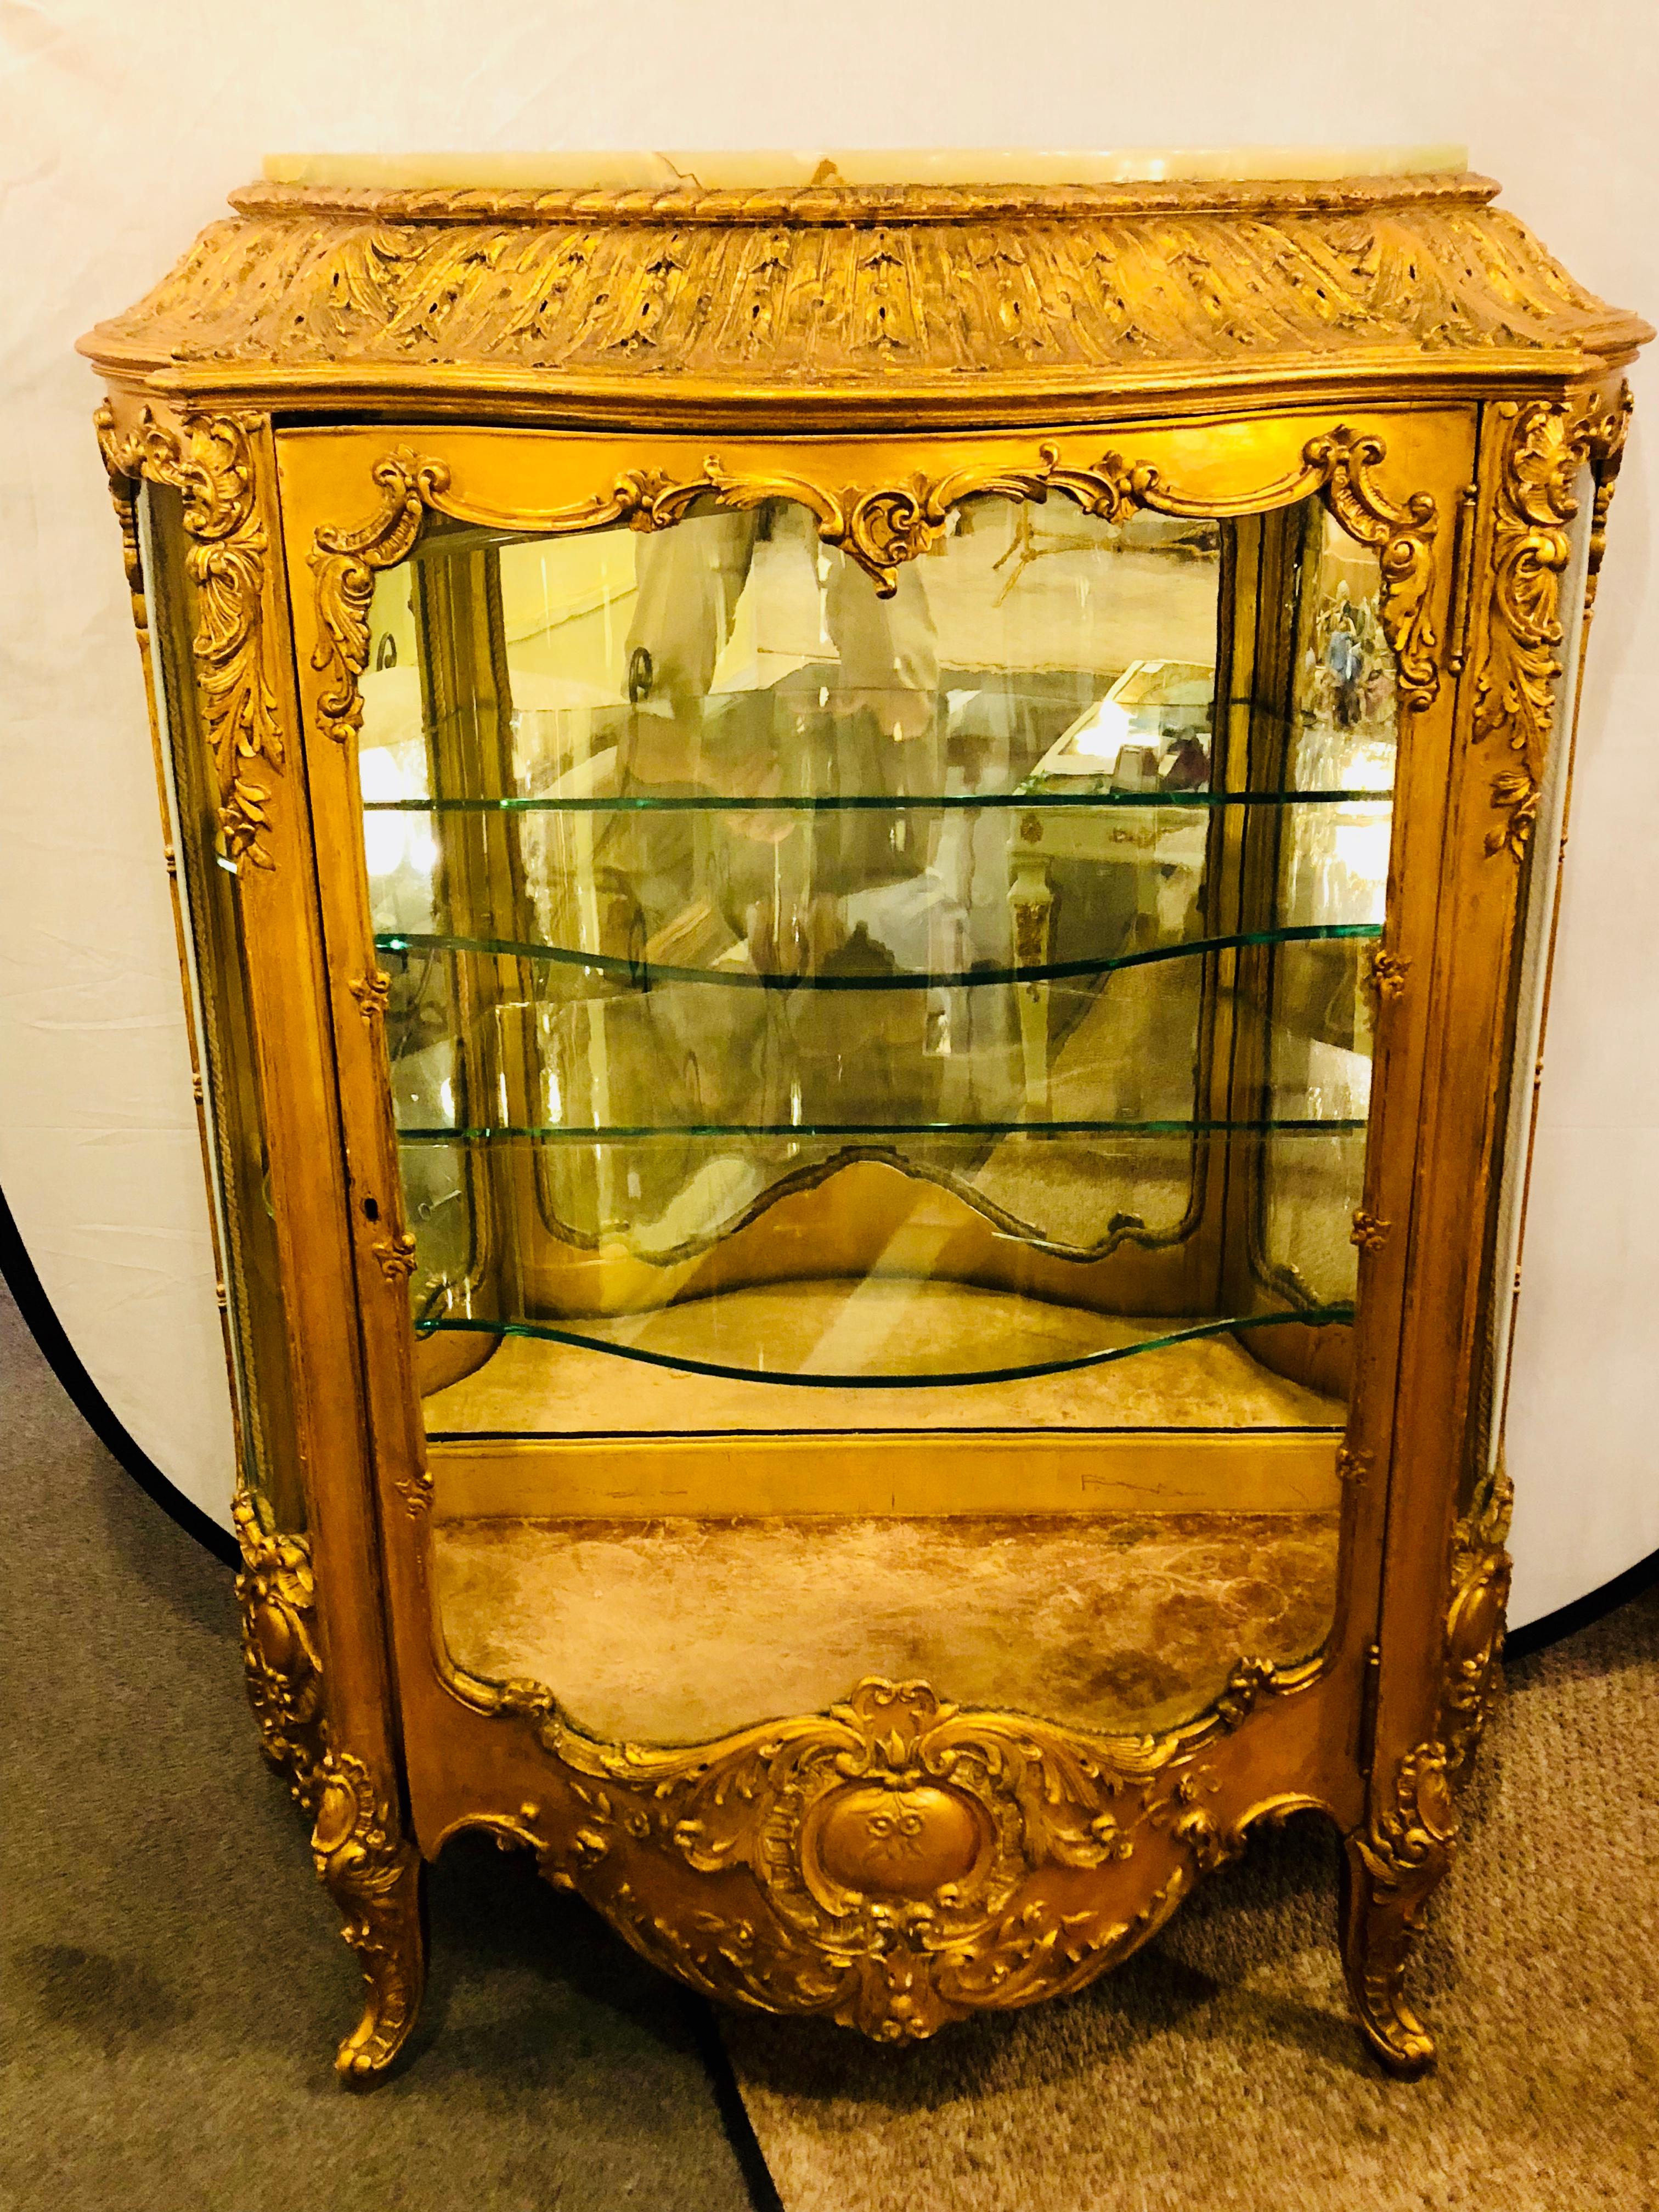 A 19th century giltwood Louis XV carved Curio vitrine showcase cabinet. This is simply the finest vitrine or curio one could possibly wish for. The finely carved frame having scroll floral flame leaf and vine work of the finest detail all done in a